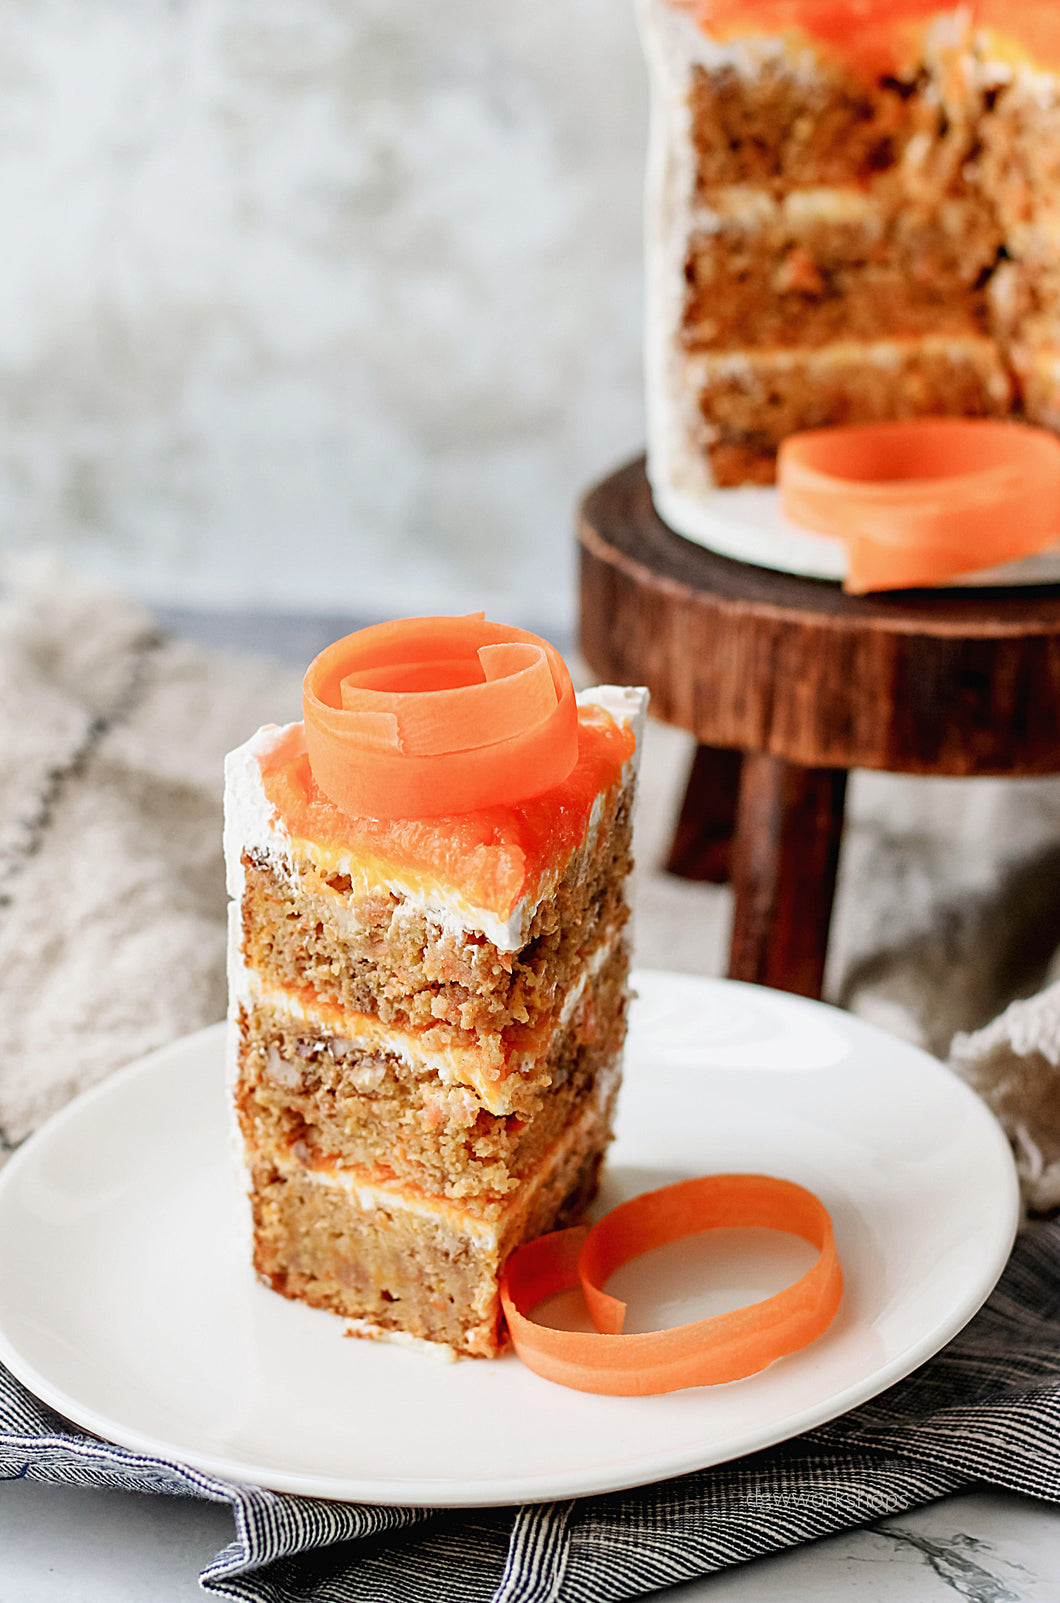 Hands-on Pineapple Carrot Cake with Fresh Cream Cheese Frosting and Orange-Carrot Jam Workshop